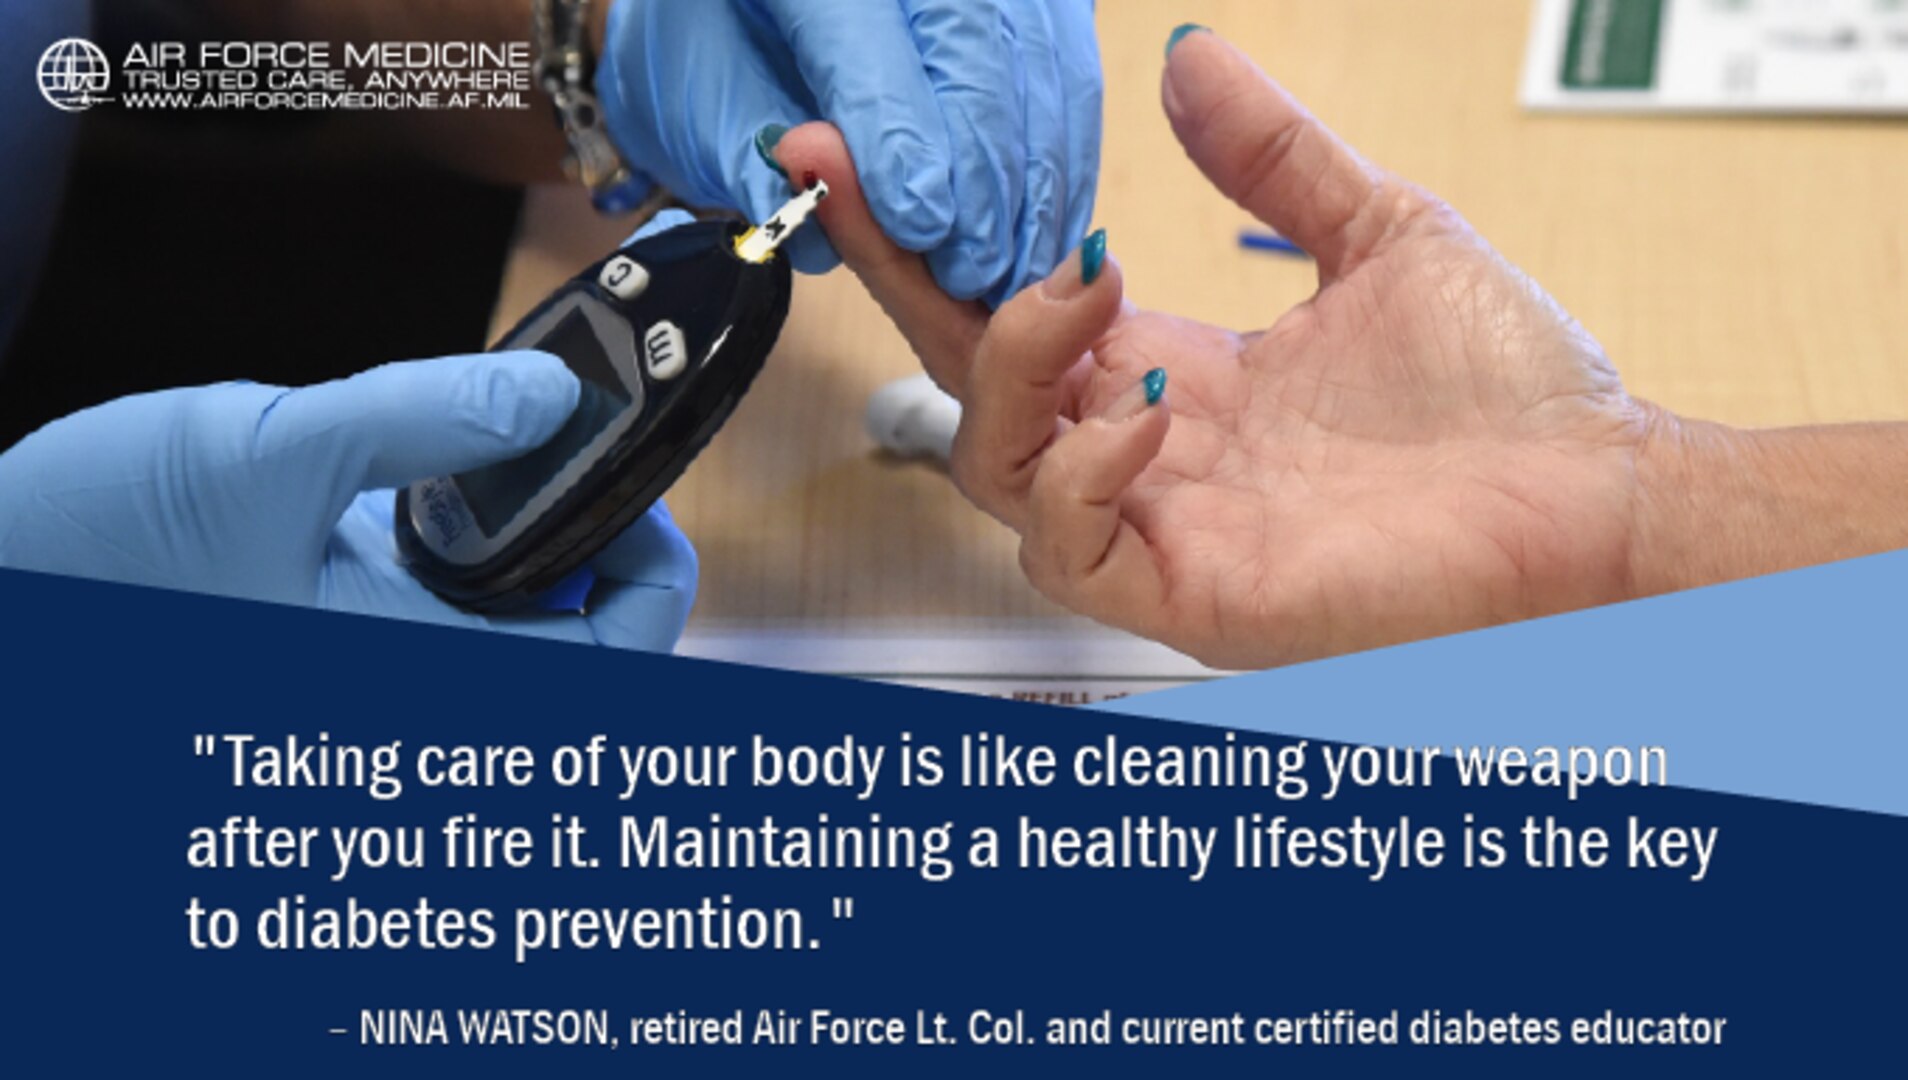 1 in 3 Americans are have prediabetes. Research has shown that we can delay and even prevent the onset of diabetes through simple lifestyle changes that can make significant, positive changes in our health.